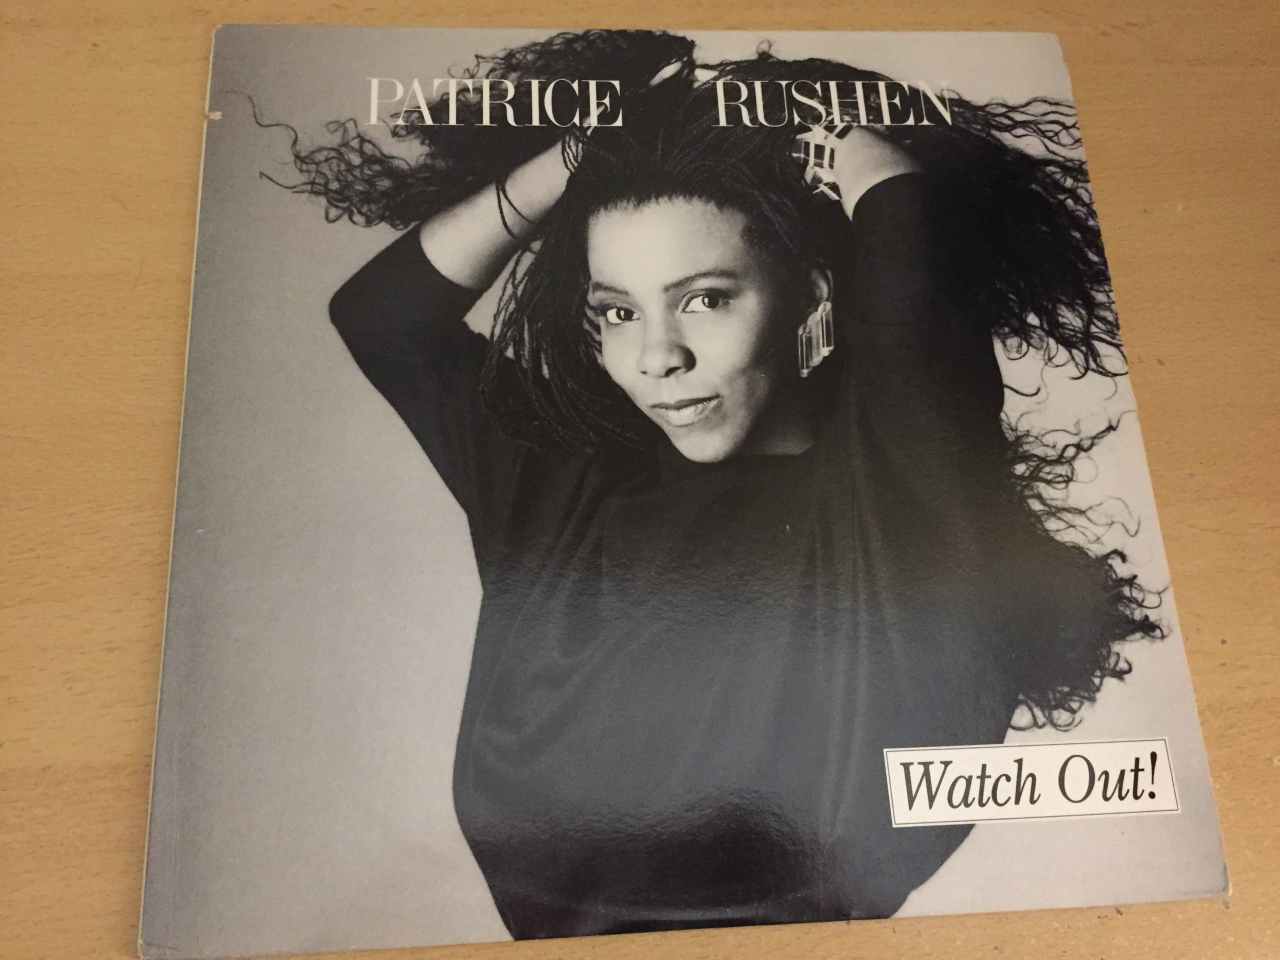 shout it out patrice rushen